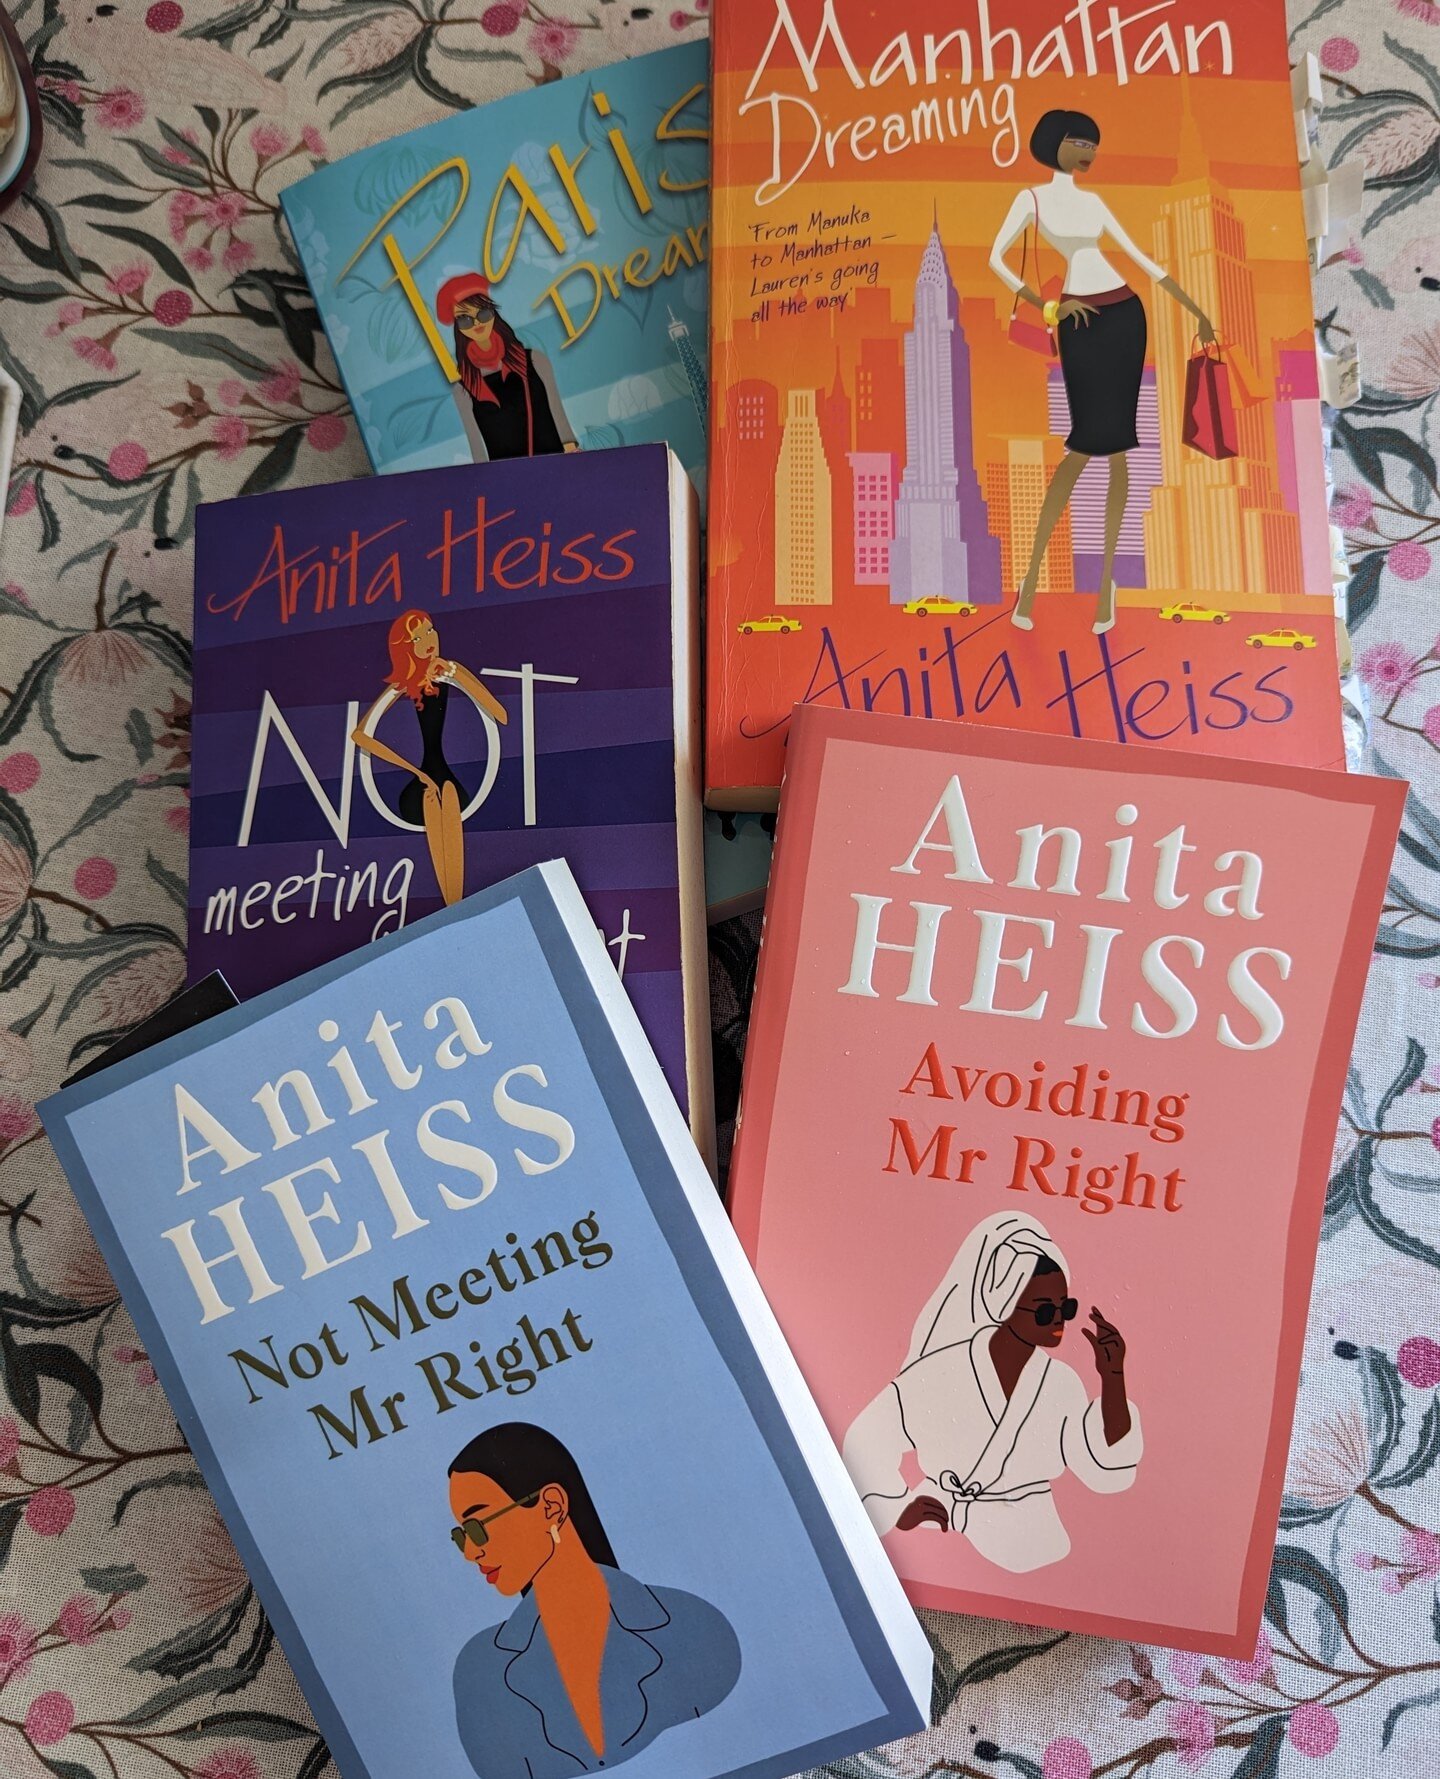 'Not meeting Mr Right' and 'Avoiding Mr Right' by Anita Heiss (@dranitaheiss), published by Simon &amp; Schuster AU (@simonschusterau)⁠
⁠
As you can see from my stack of books, I am one of the original 'fanitas' (although, who has my original copy of